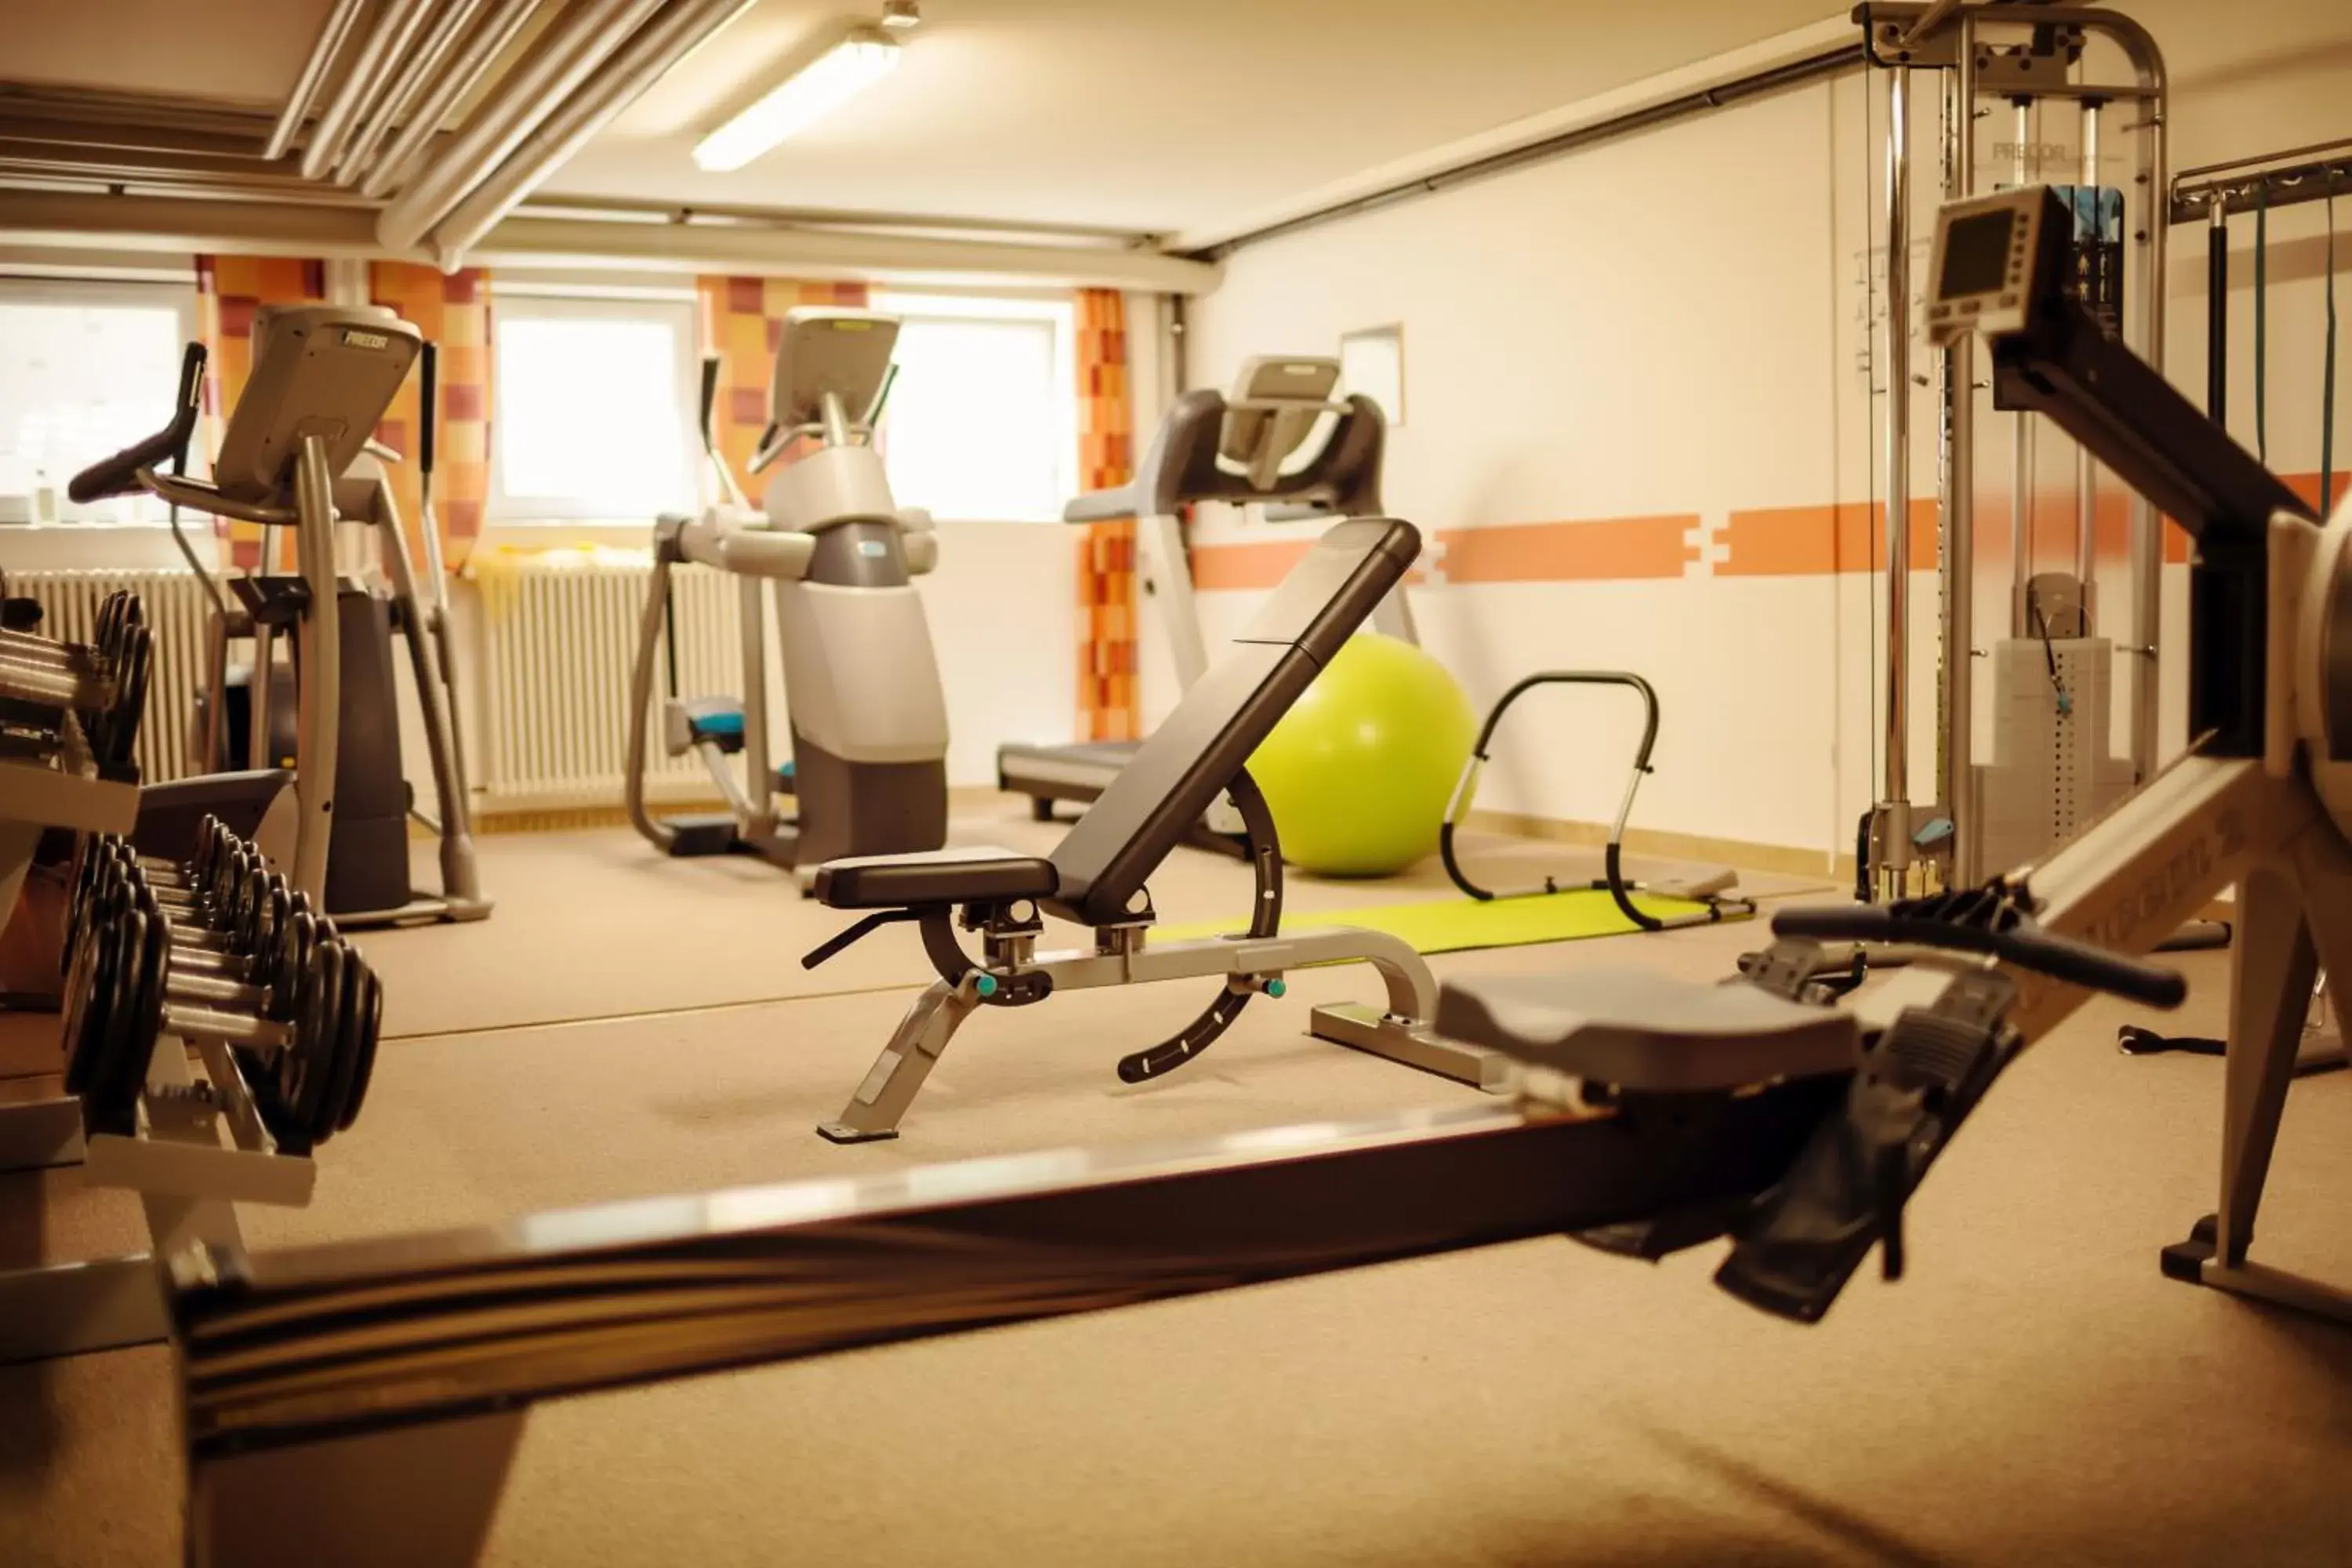 Fitness centre/facilities, Fitness Center/Facilities in Kloster St. Josef